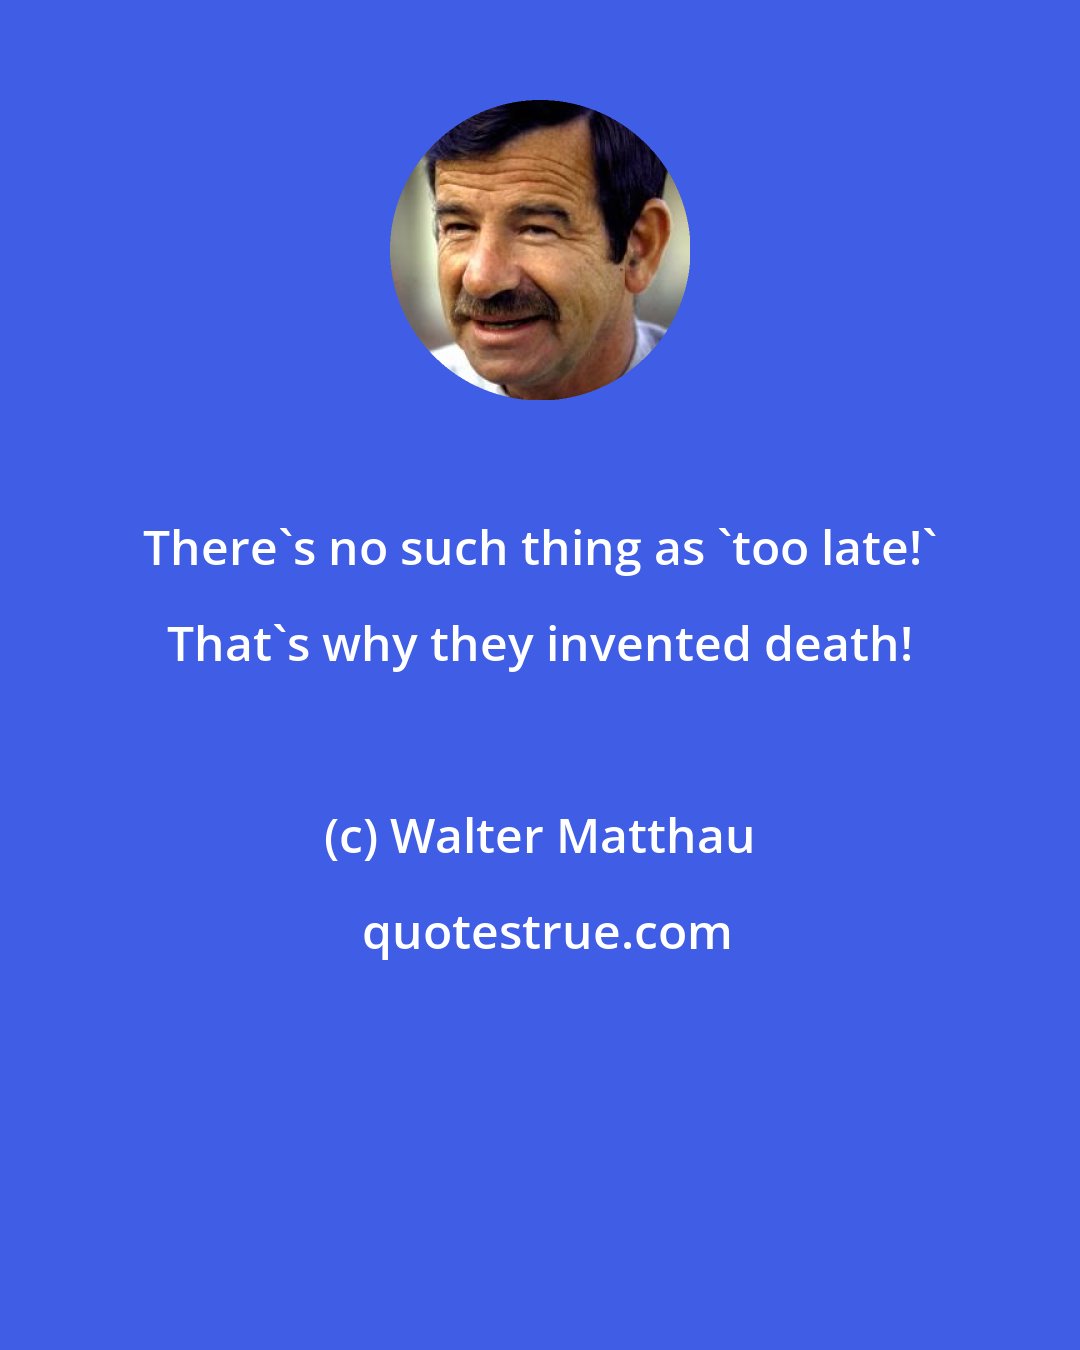 Walter Matthau: There's no such thing as 'too late!' That's why they invented death!